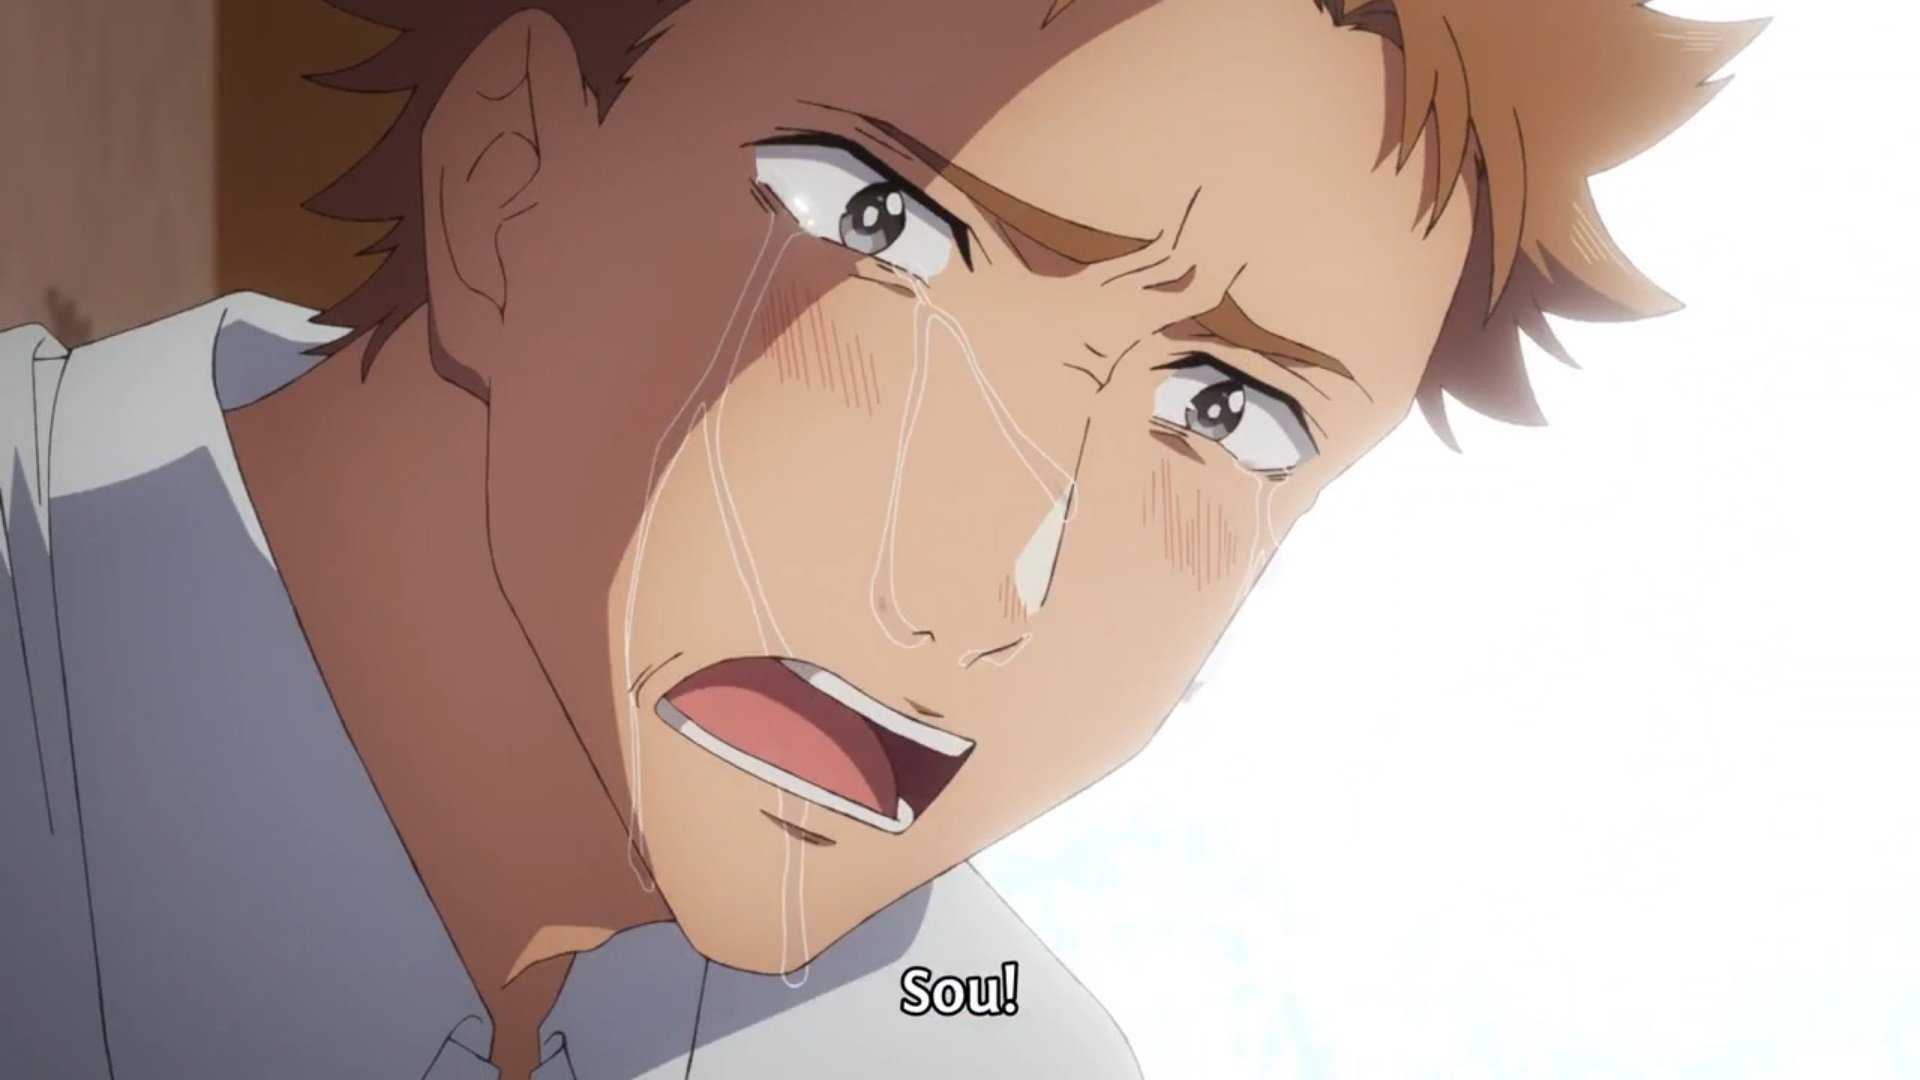 Sou (Kensho Ono) crying and blaming himself for Ushio's death